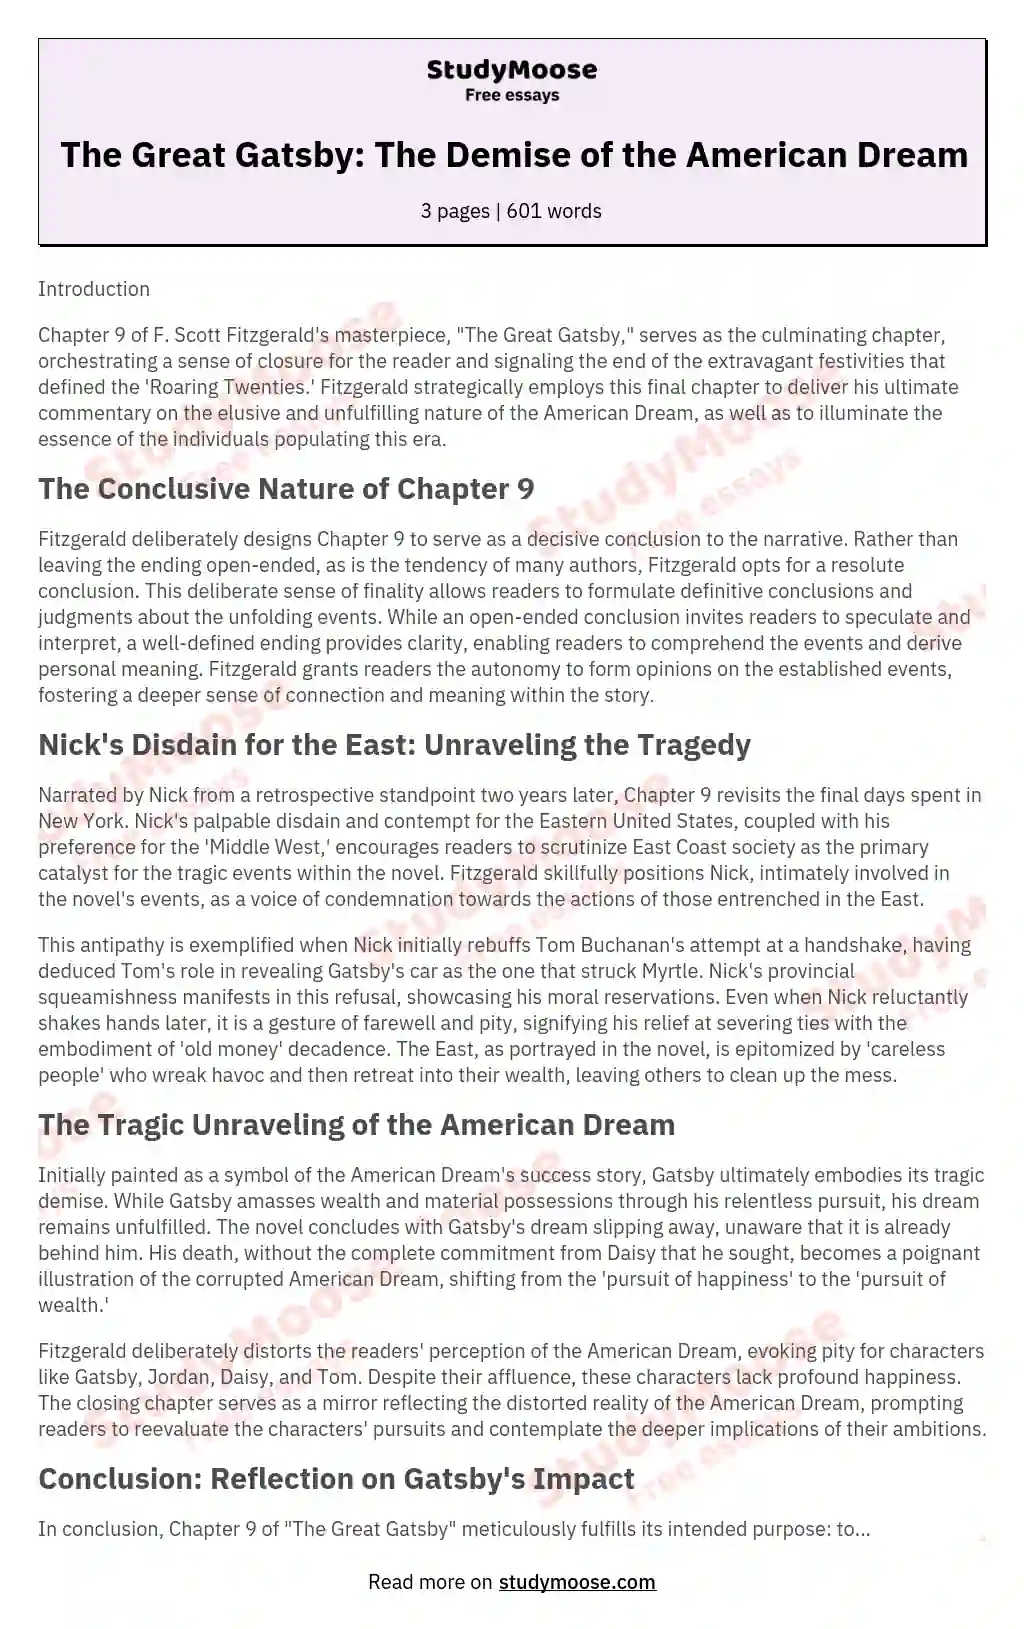 The Great Gatsby: The Demise of the American Dream essay